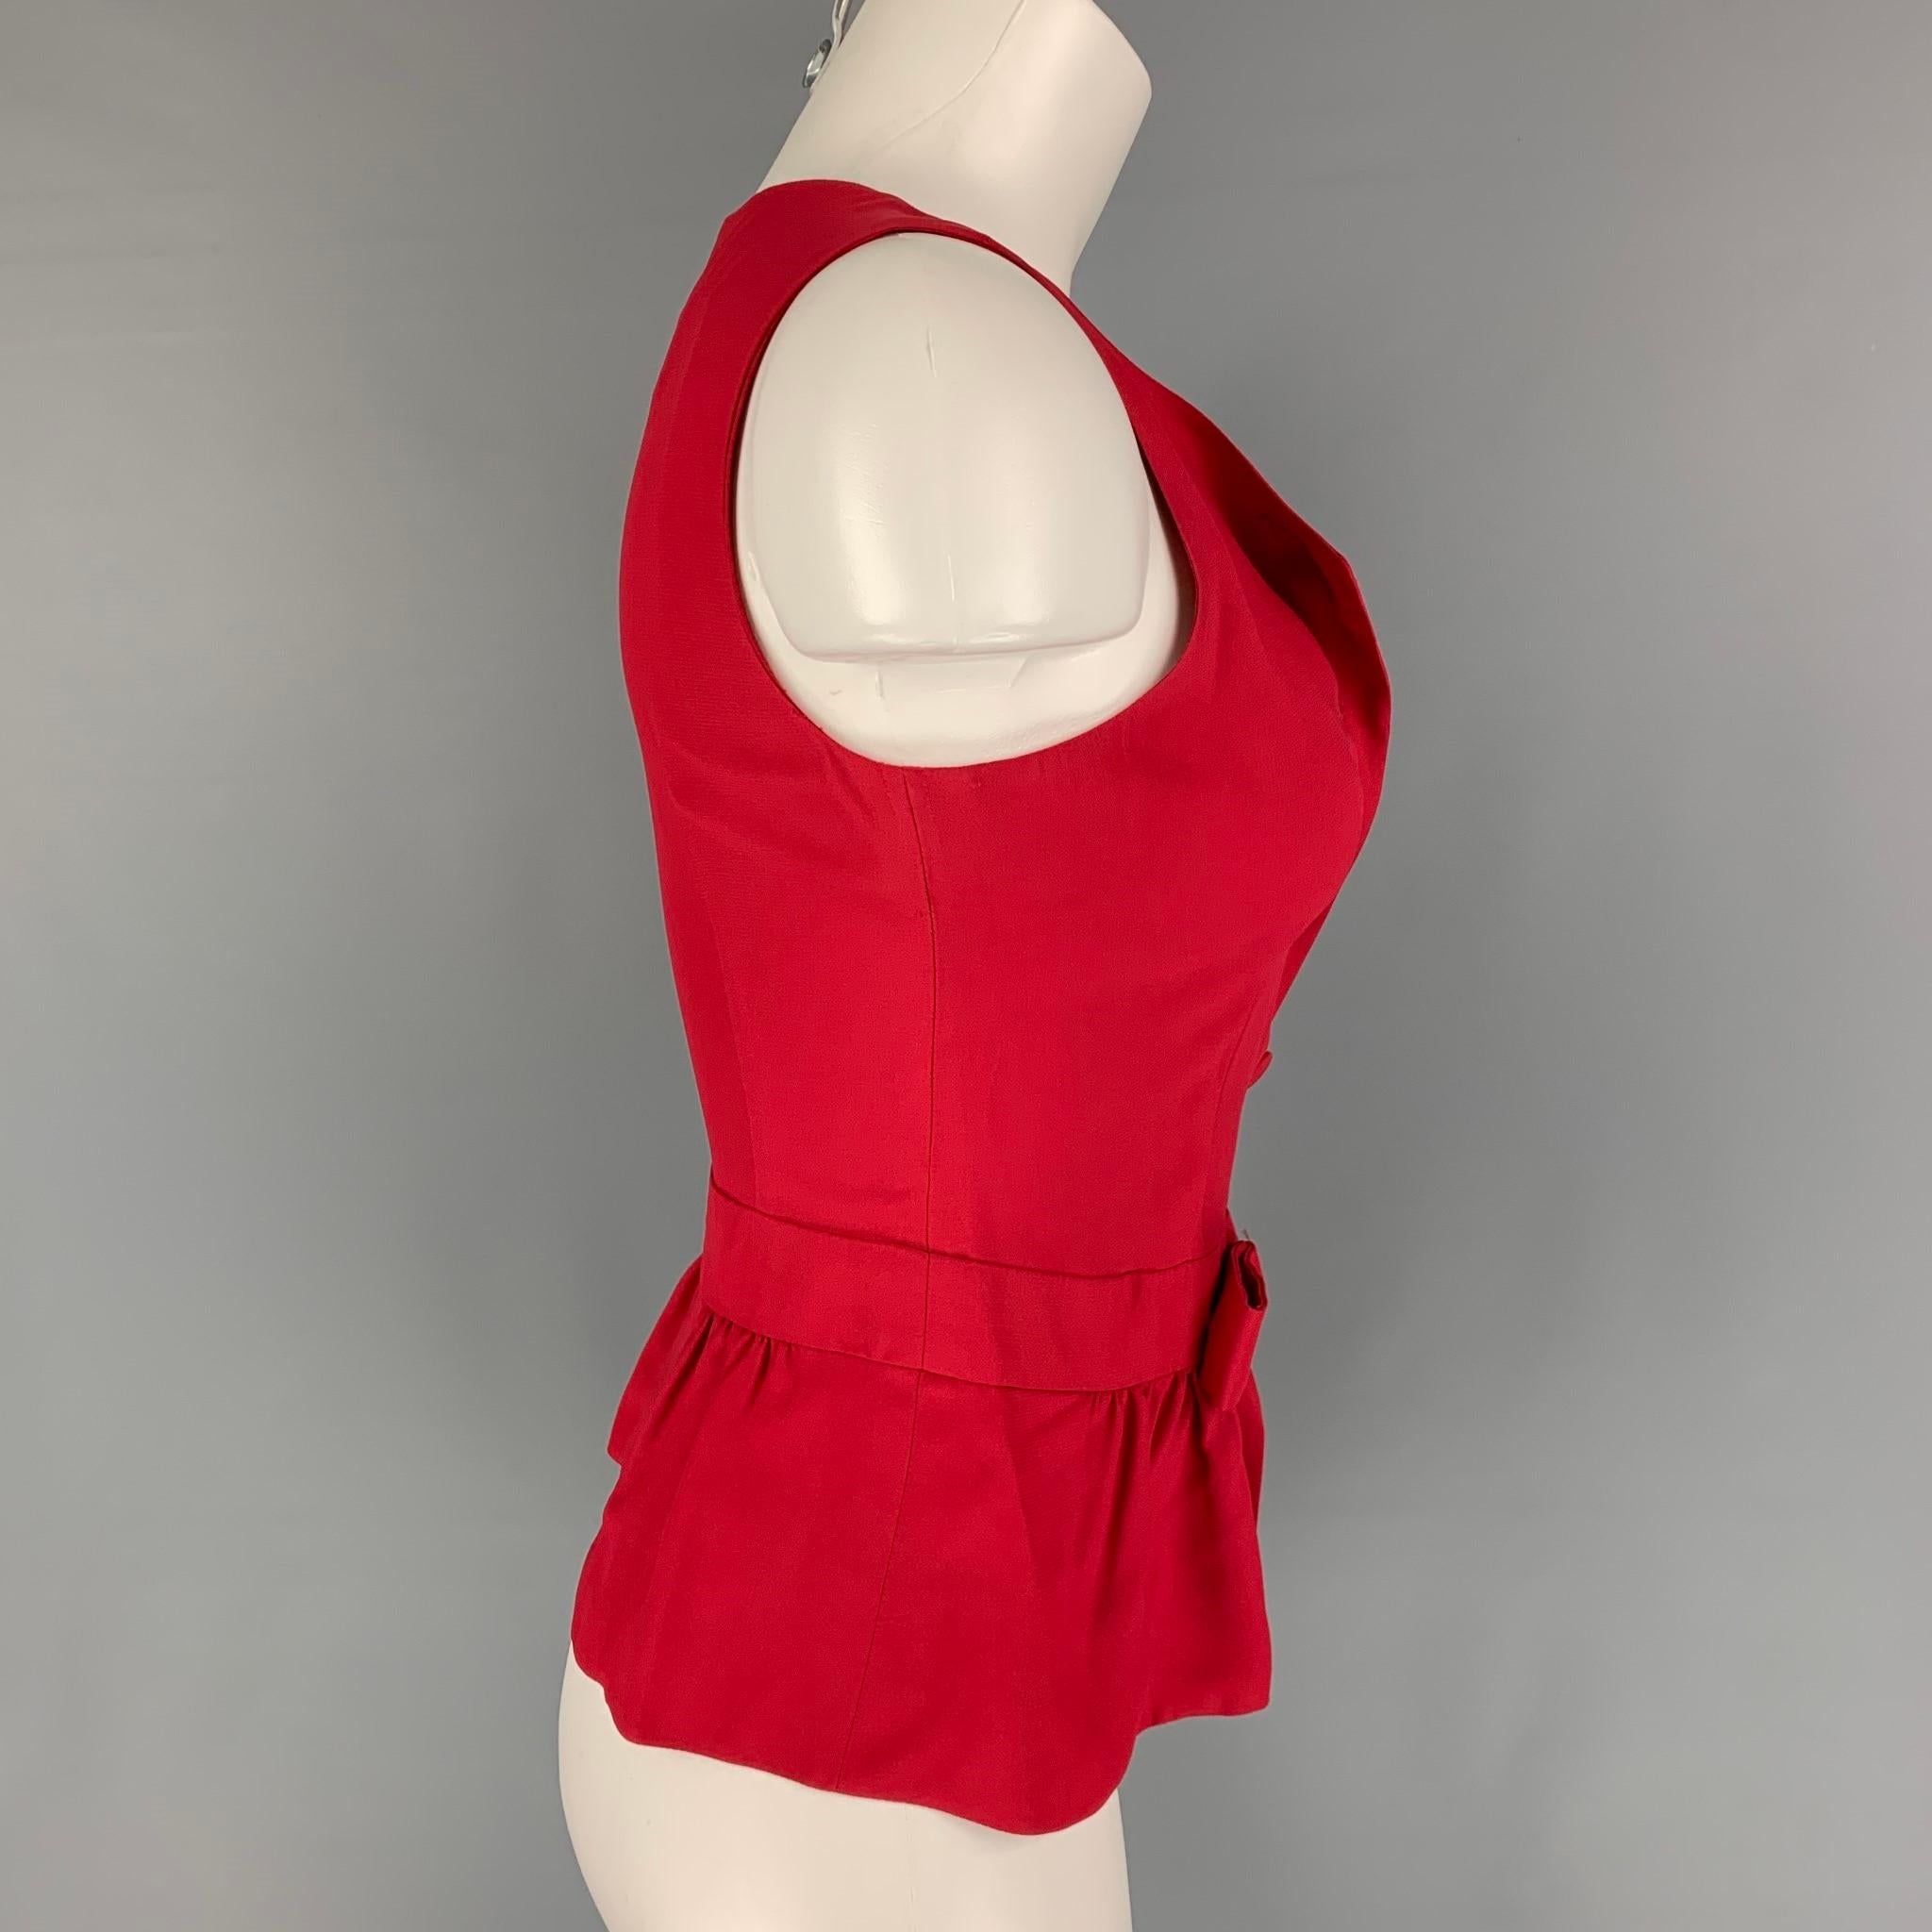 MOSCHINO COUTURE Size 8 Red Acetate Rayon Sleeveless Blouse
MOSCHINO COUTURE Size 8 Red Acetate Rayon Sleeveless Blouse
MOSCHINO COUTURE Size 8 Red Acetate Rayon Sleeveless Blouse
MOSCHINO COUTURE Size 8 Red Acetate Rayon Sleeveless Blouse
MOSCHINO